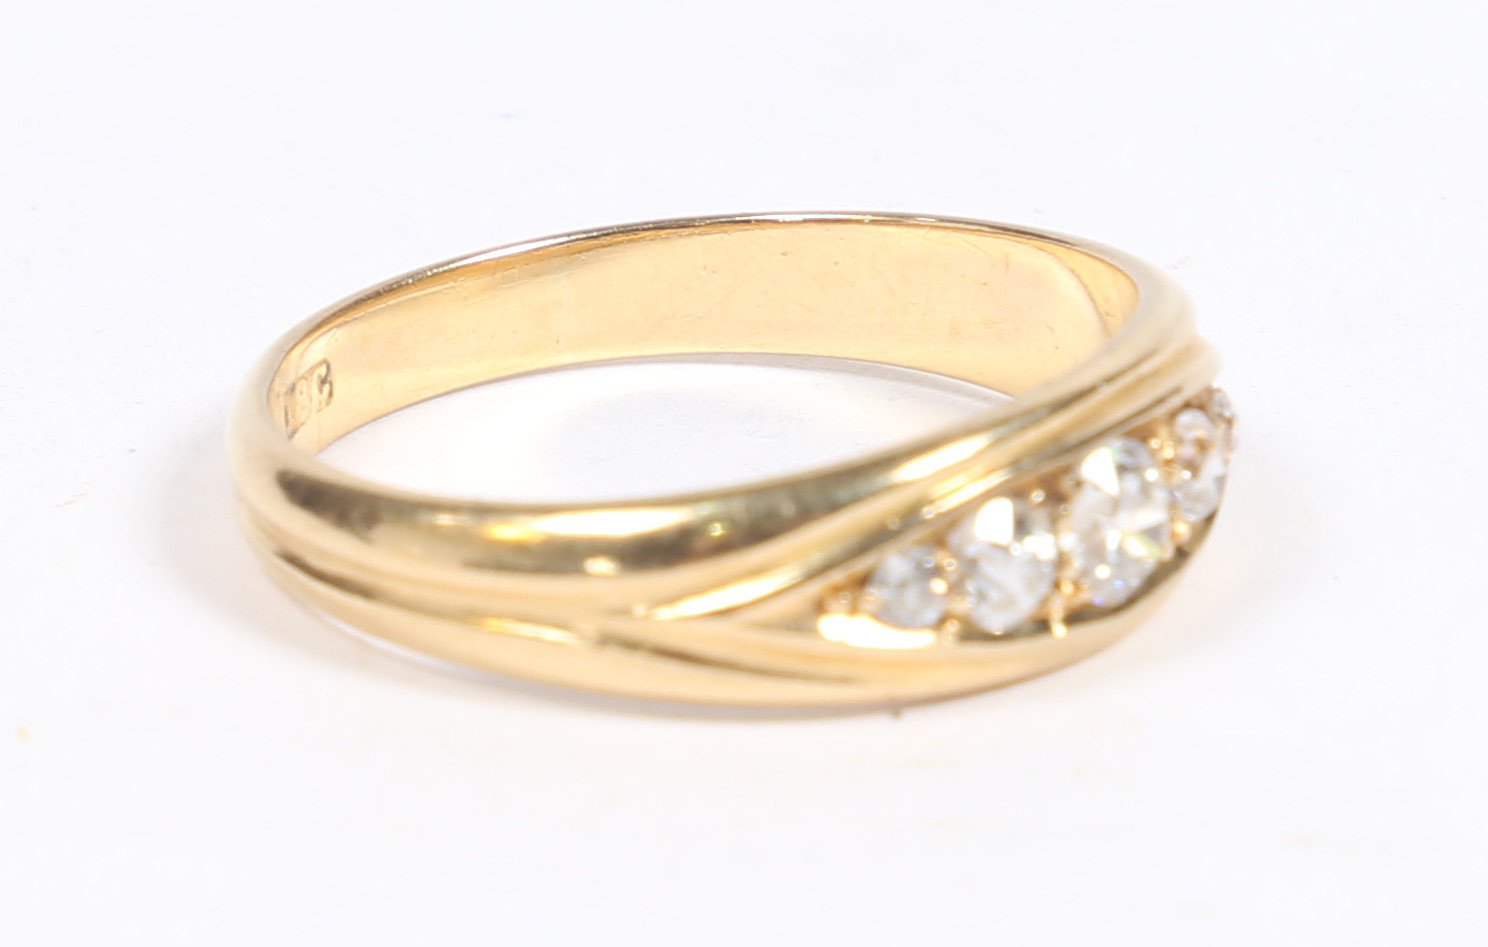 AN 18 CARAT GOLD AND DIAMOND RING. - Image 4 of 6